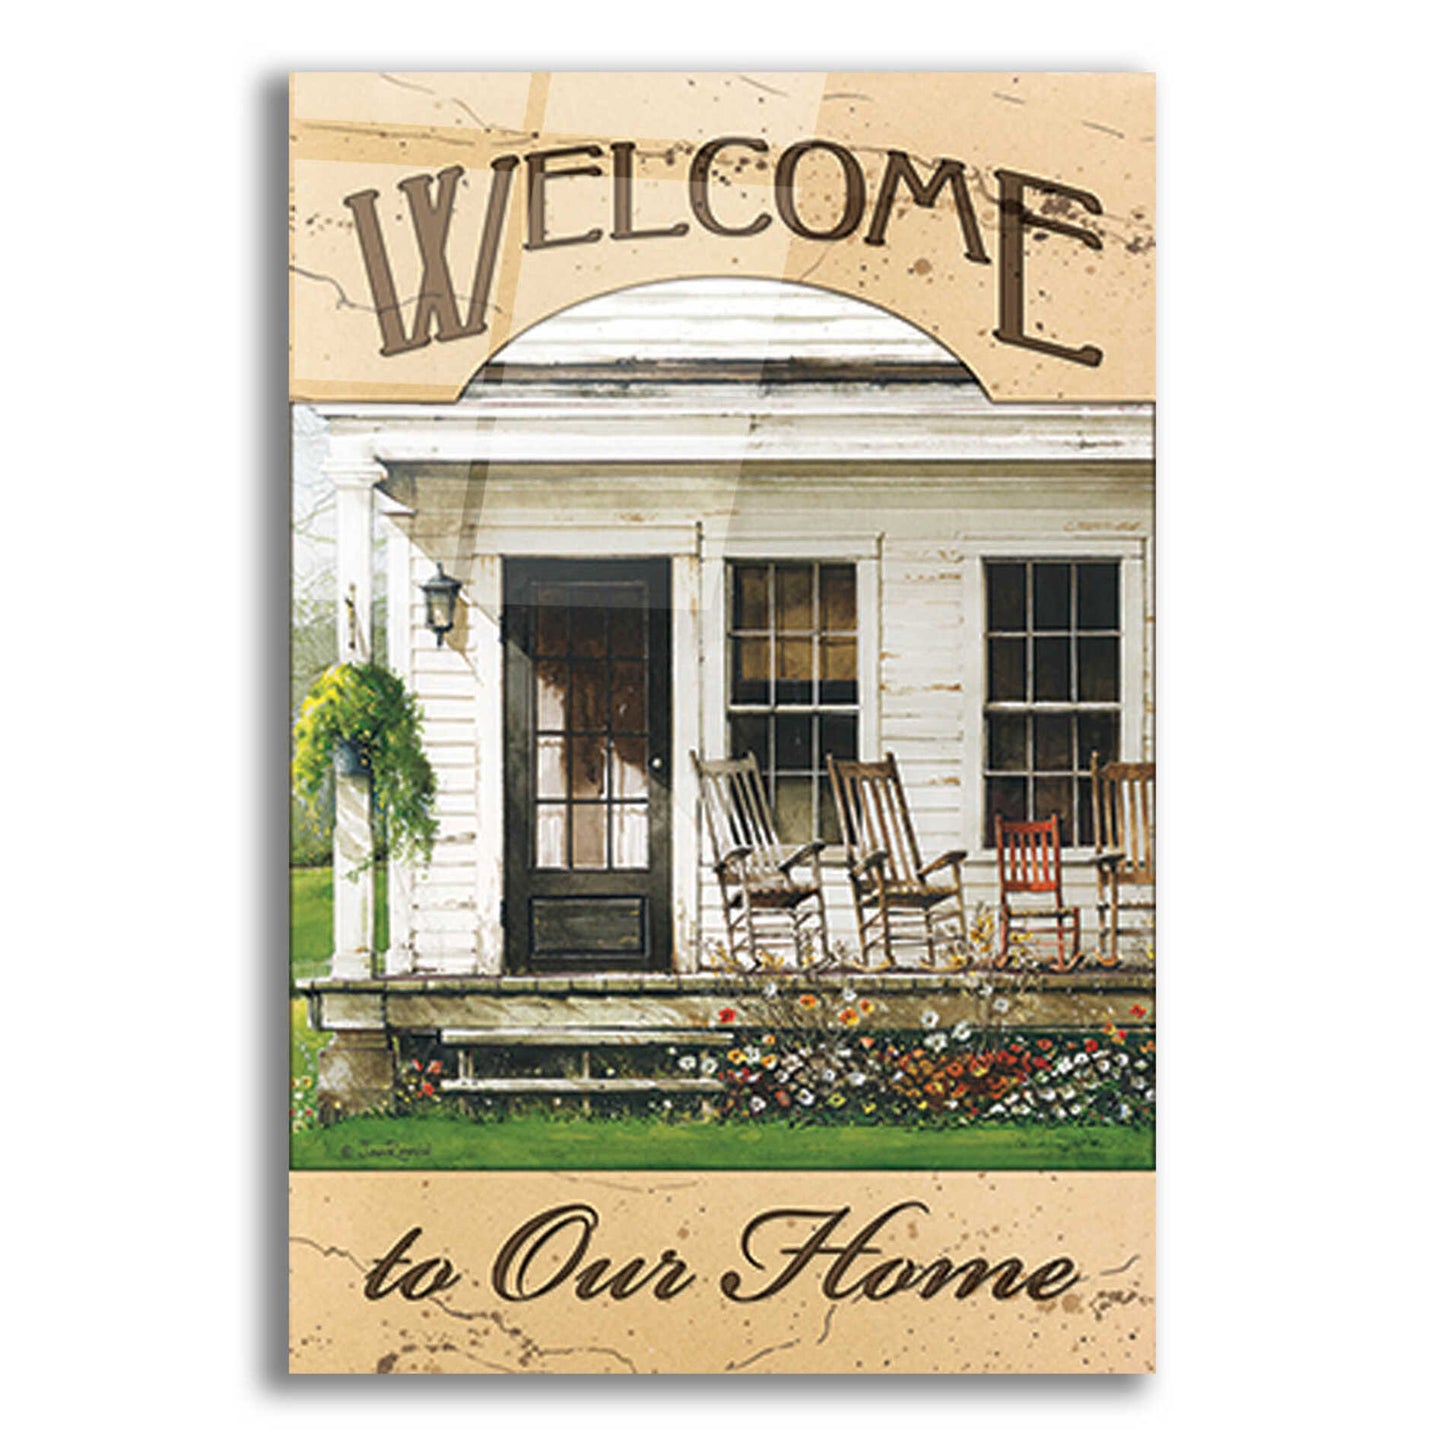 Epic Art 'Welcome to Our Home' by John Rossini, Acrylic Glass Wall Art,12x16